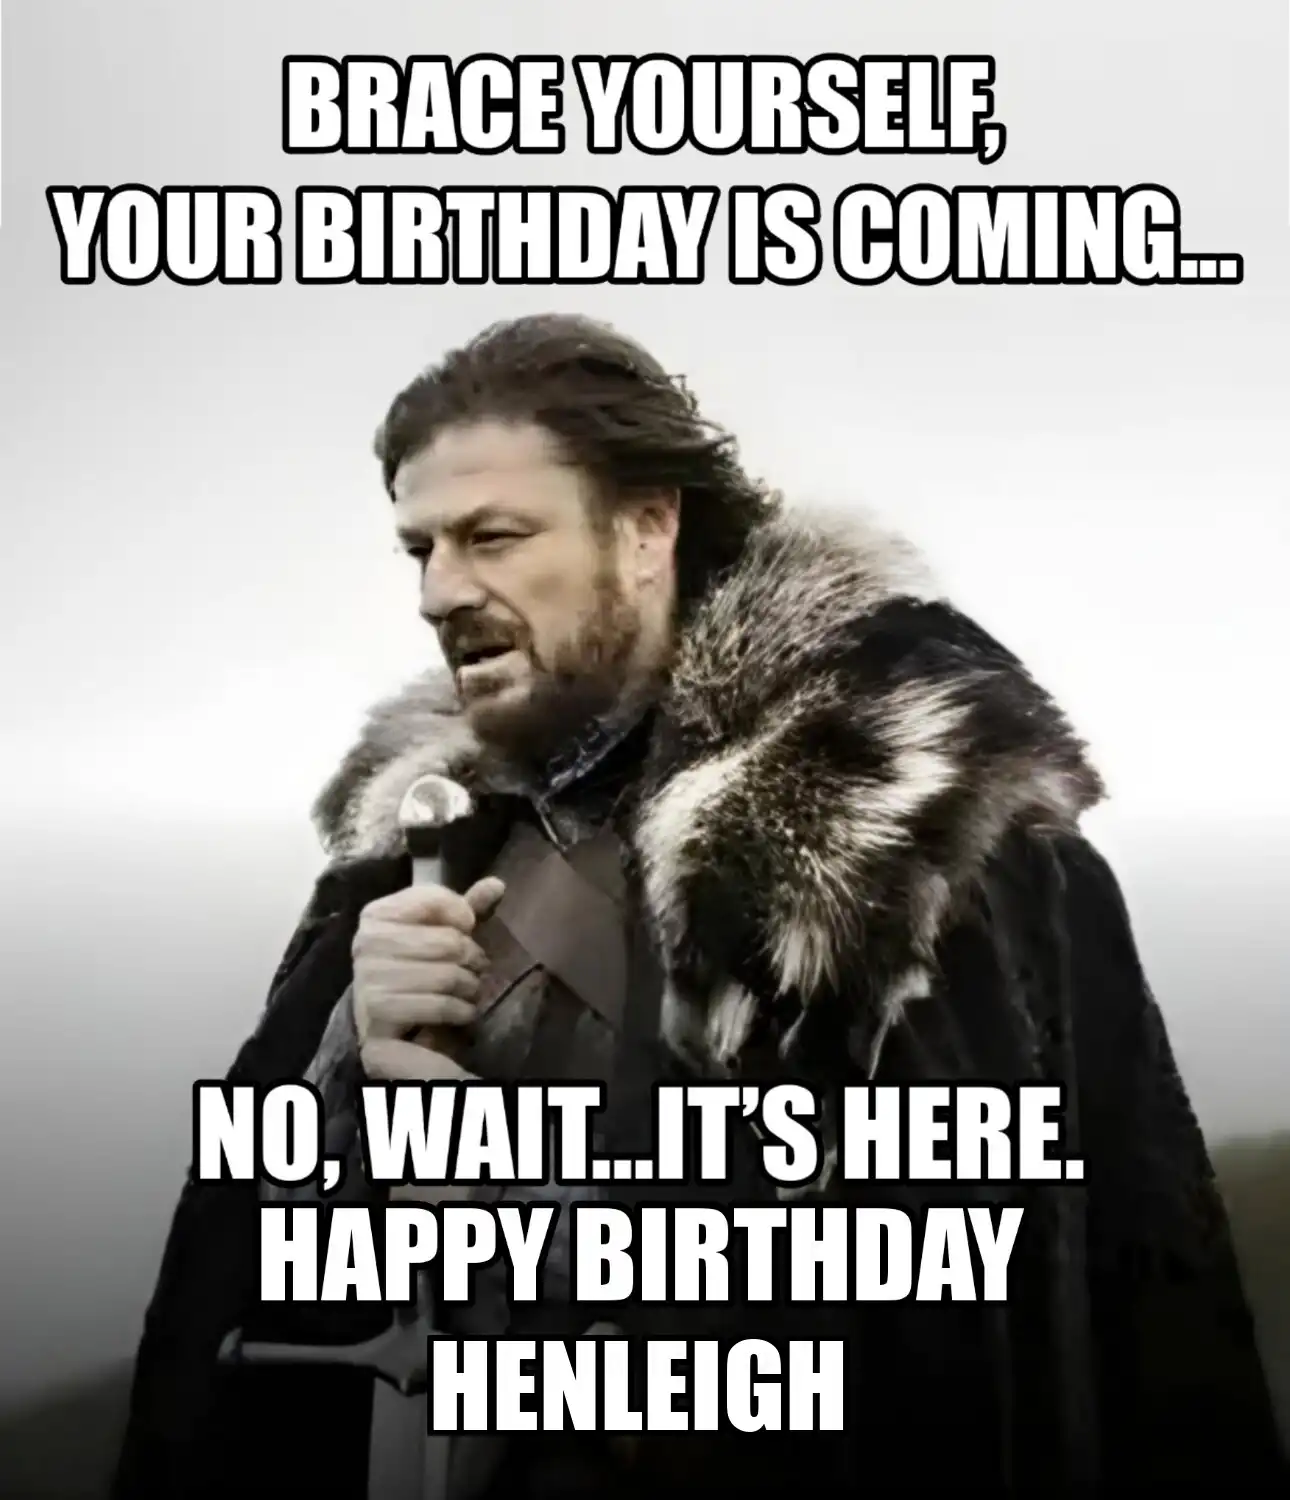 Happy Birthday Henleigh Brace Yourself Your Birthday Is Coming Meme